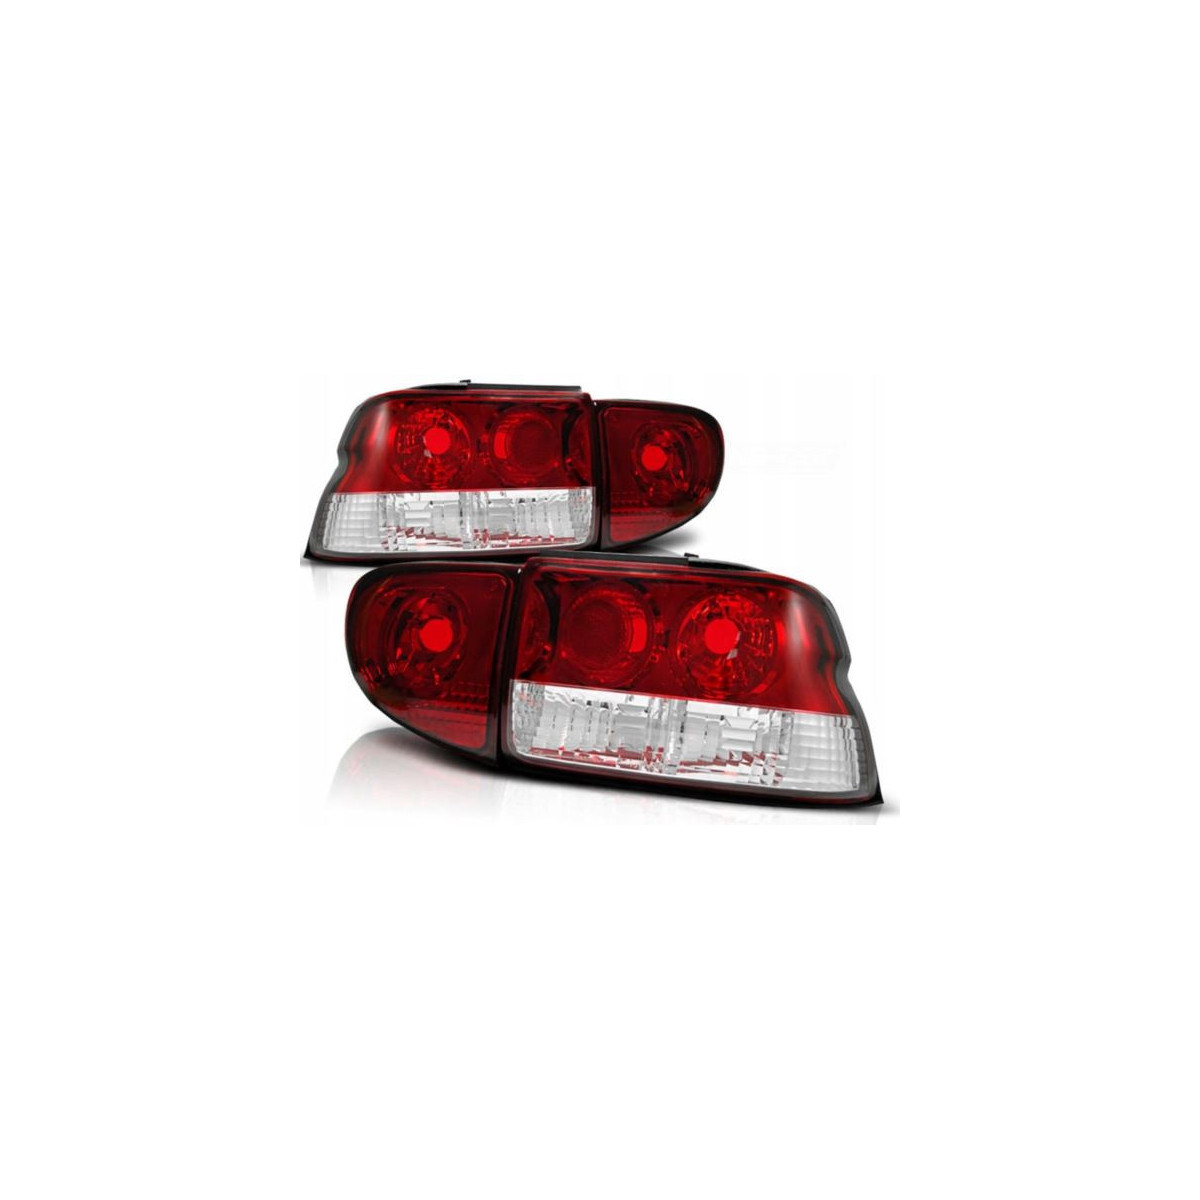 LAMPY TYLNE FORD ESCORT MK6/7 RED/CRYS.